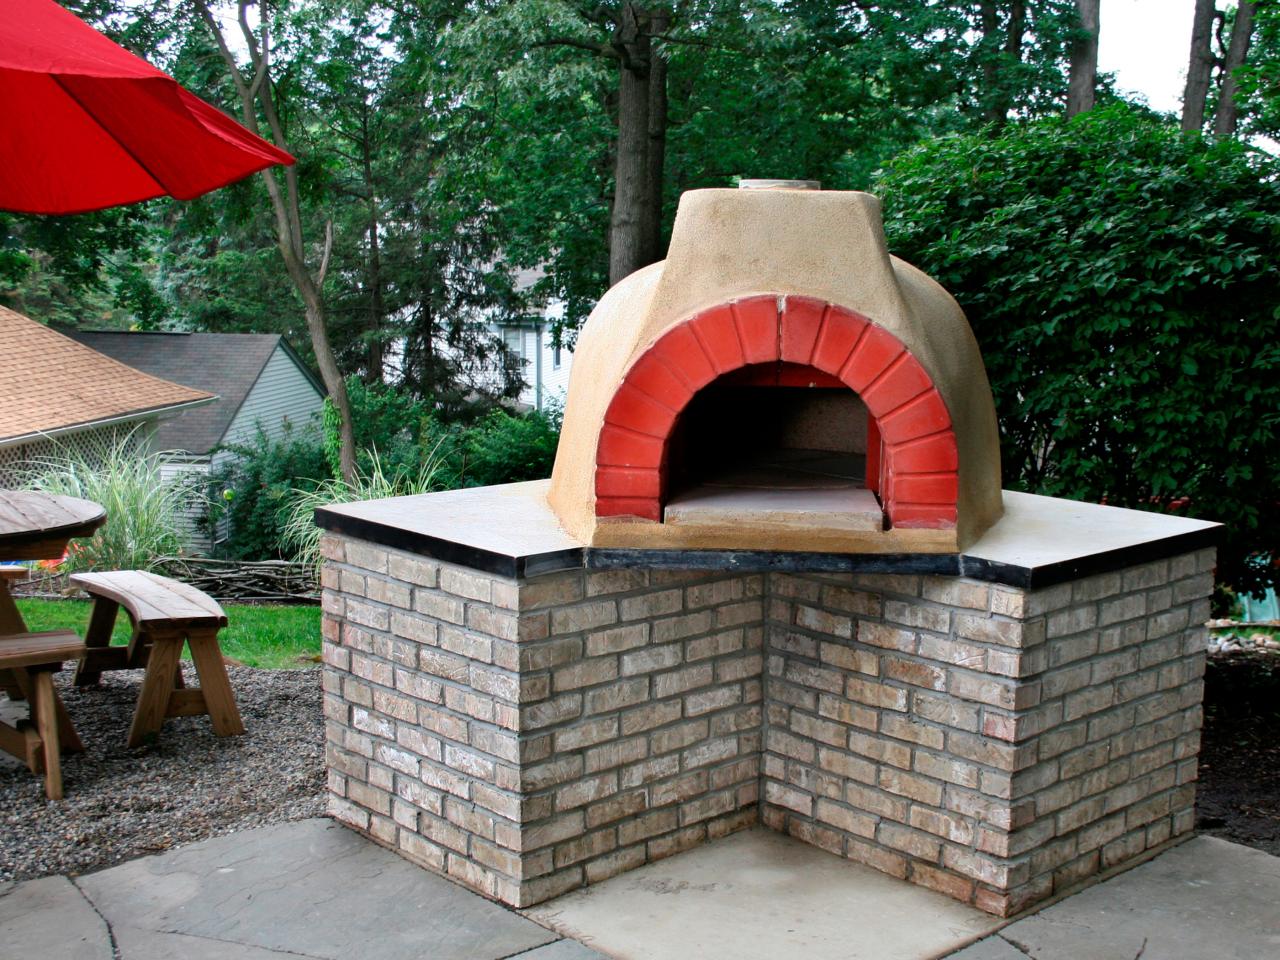 How To Build An Outdoor Pizza Oven, How Much To Build An Outdoor Pizza Oven